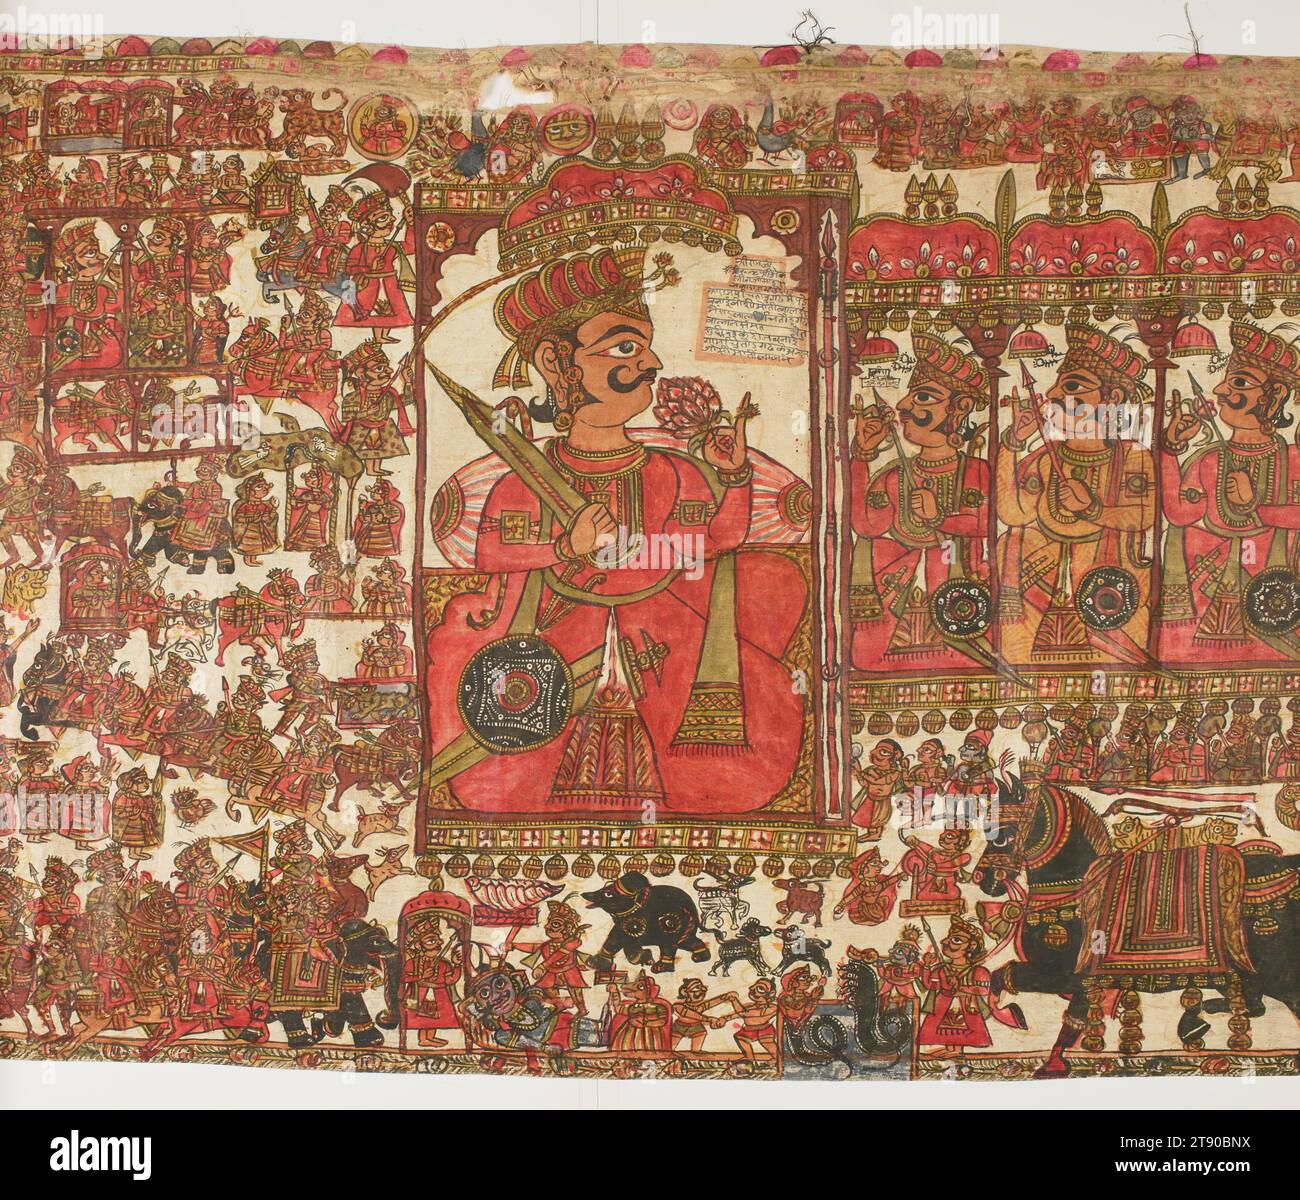 Scroll Painting Dedicated to Pabuji, 20th century, Motilal Josi, Indian, 62 × 193 3/4 in. (157.48 × 492.13 cm), Mineral colors on canvas, India, 20th century, This painted scroll depicts the life of Pabuji, a deified folk hero who emerged in 14th century Rajasthan, India. The larger figurative representations feature Pabuji in profile, framed by multiple windows, while many of the complex scenes depict Pabuji as the victor of battles. A storyteller priest would have unrolled the scroll in the presence of a small audience and narrated Pabuji’s life through prose and song Stock Photo